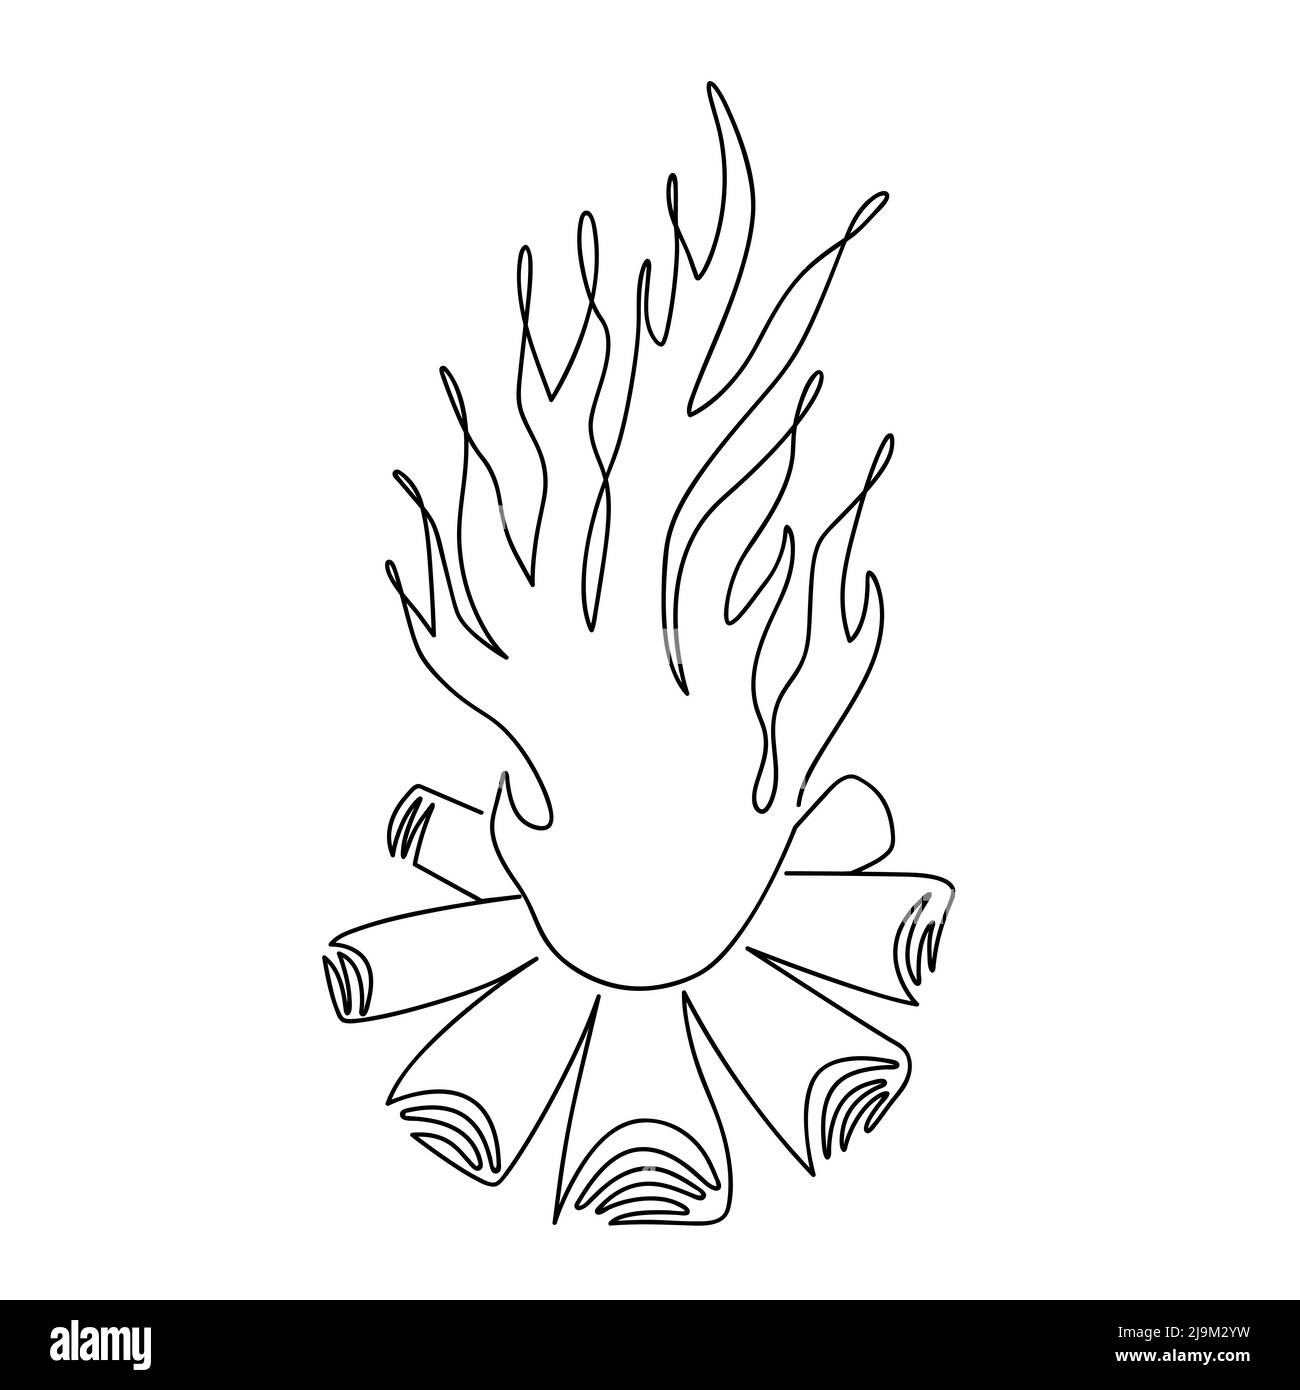 The bonfire is drawn in one line isolated on a white background